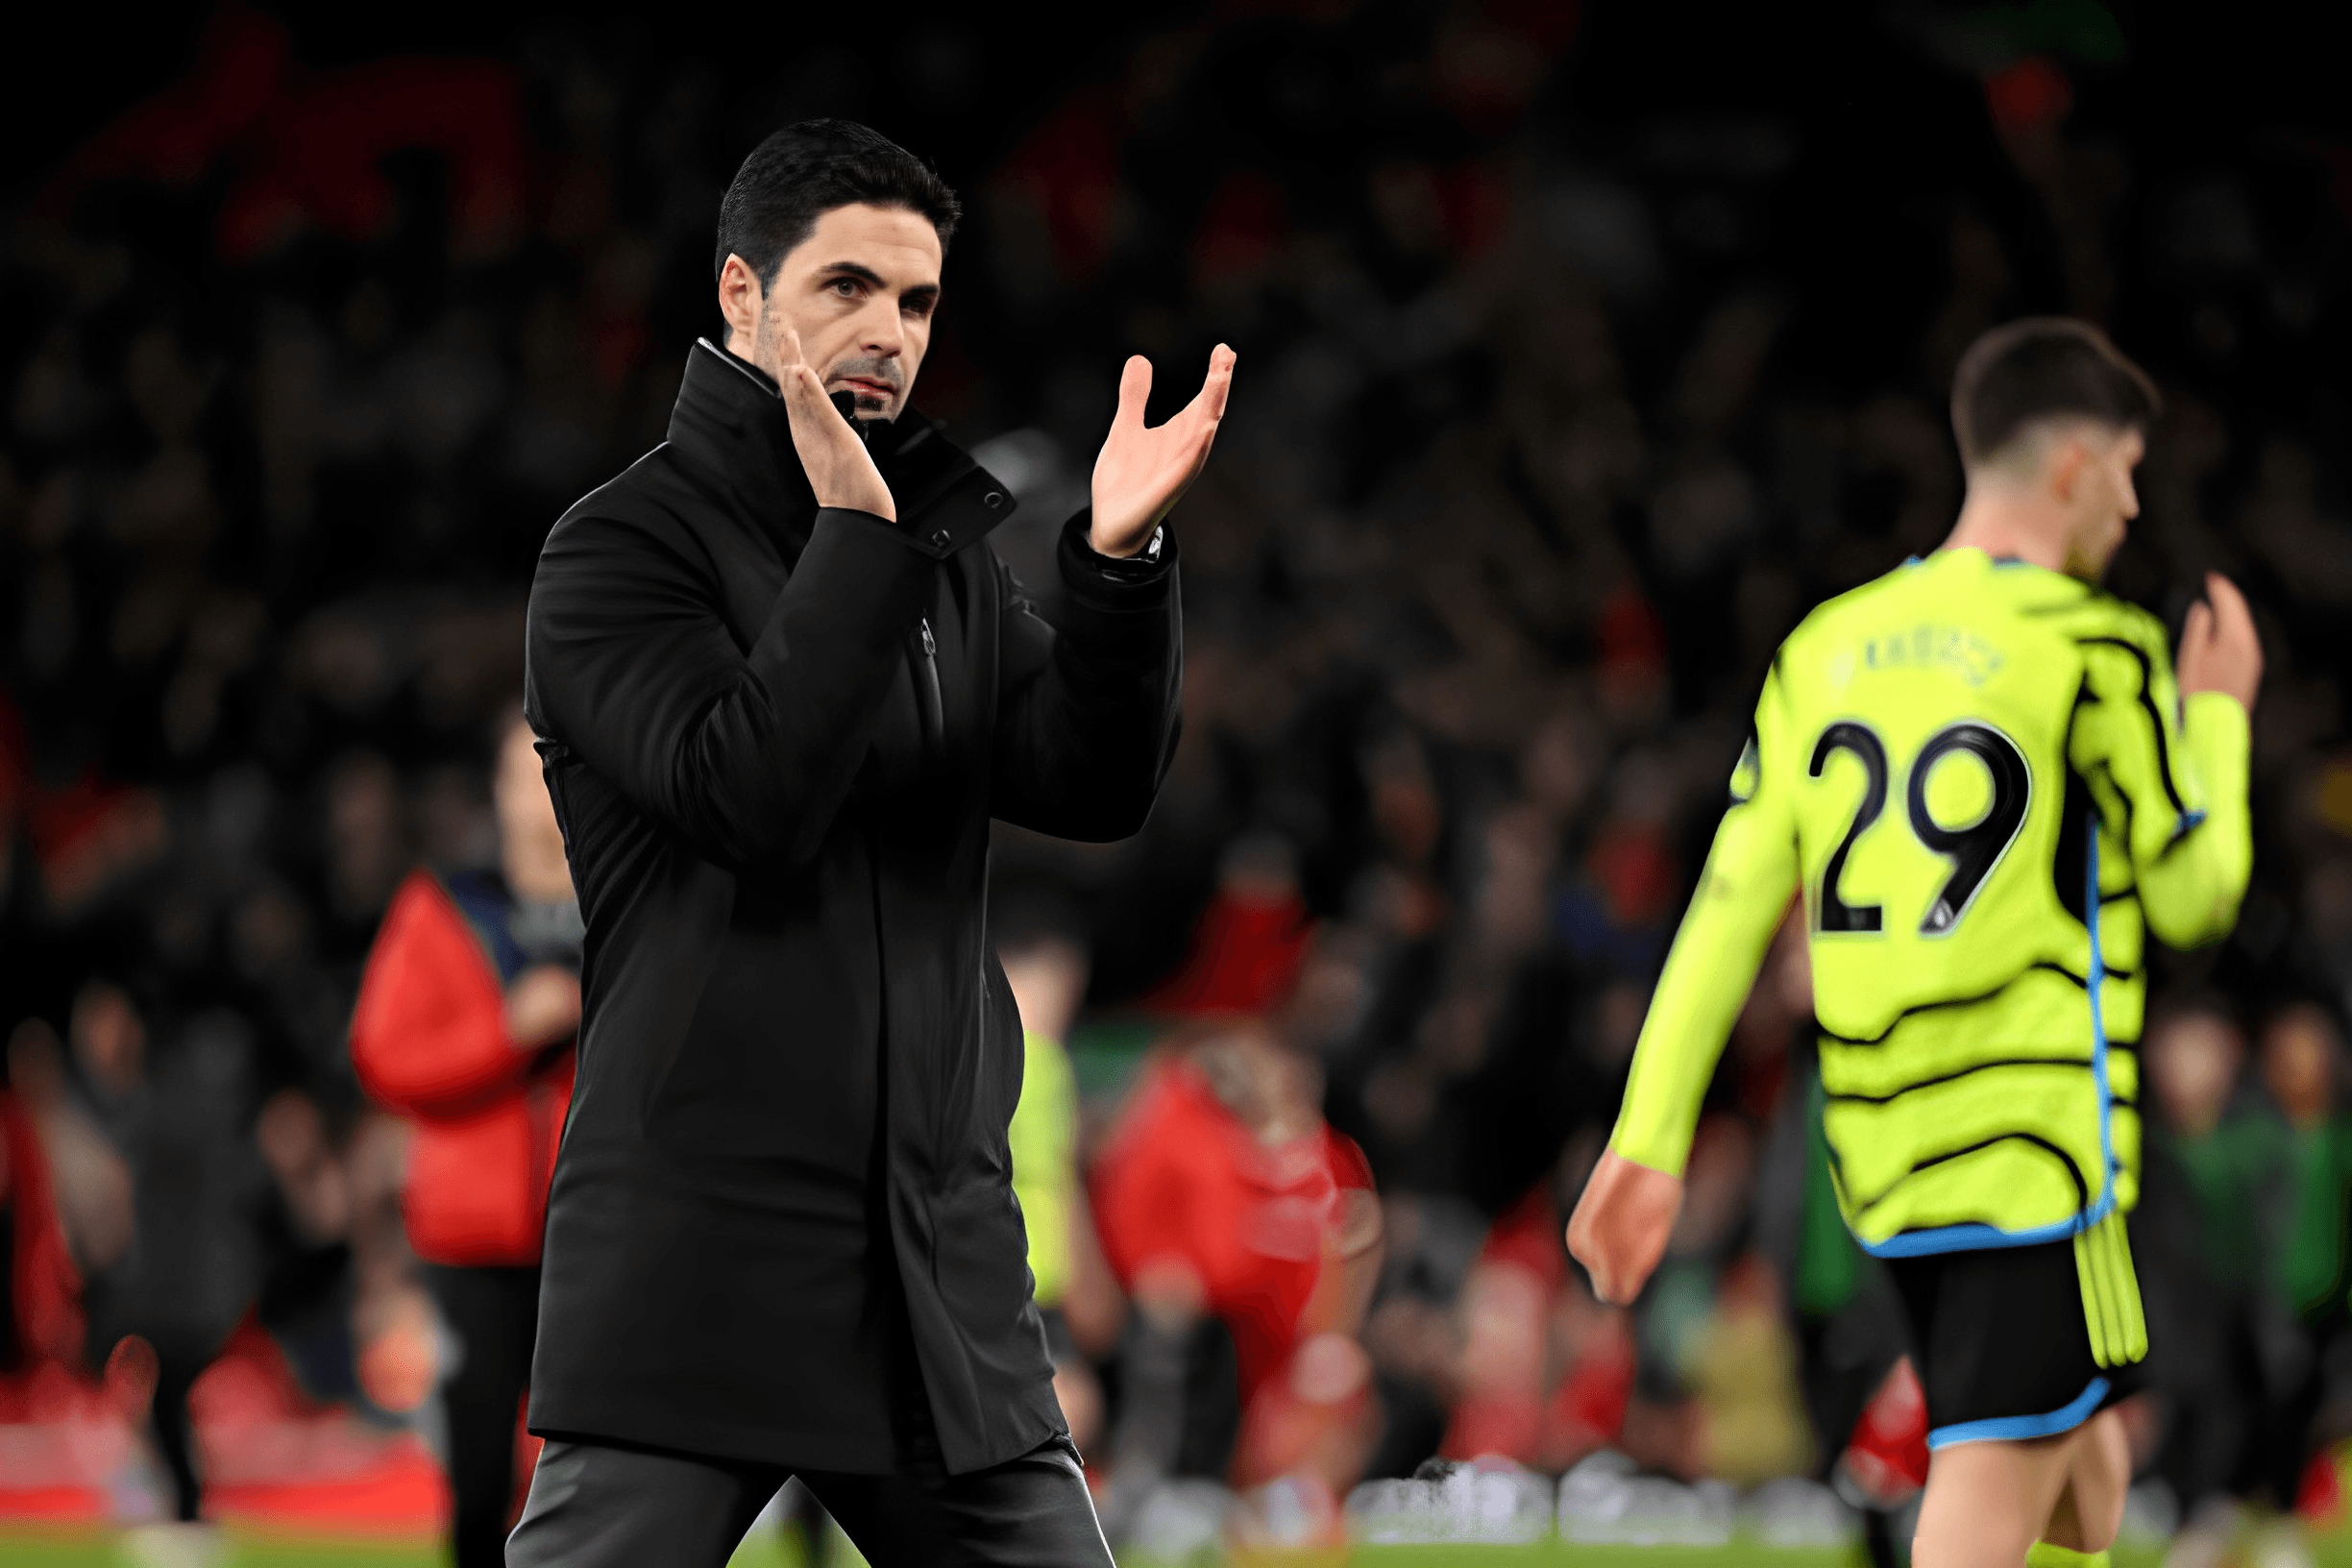 Mikel Arteta, Arsenal Manager, claps for fans after Premier League draw between Liverpool FC and Arsenal FC at Anfield on Dec 23, 2023.